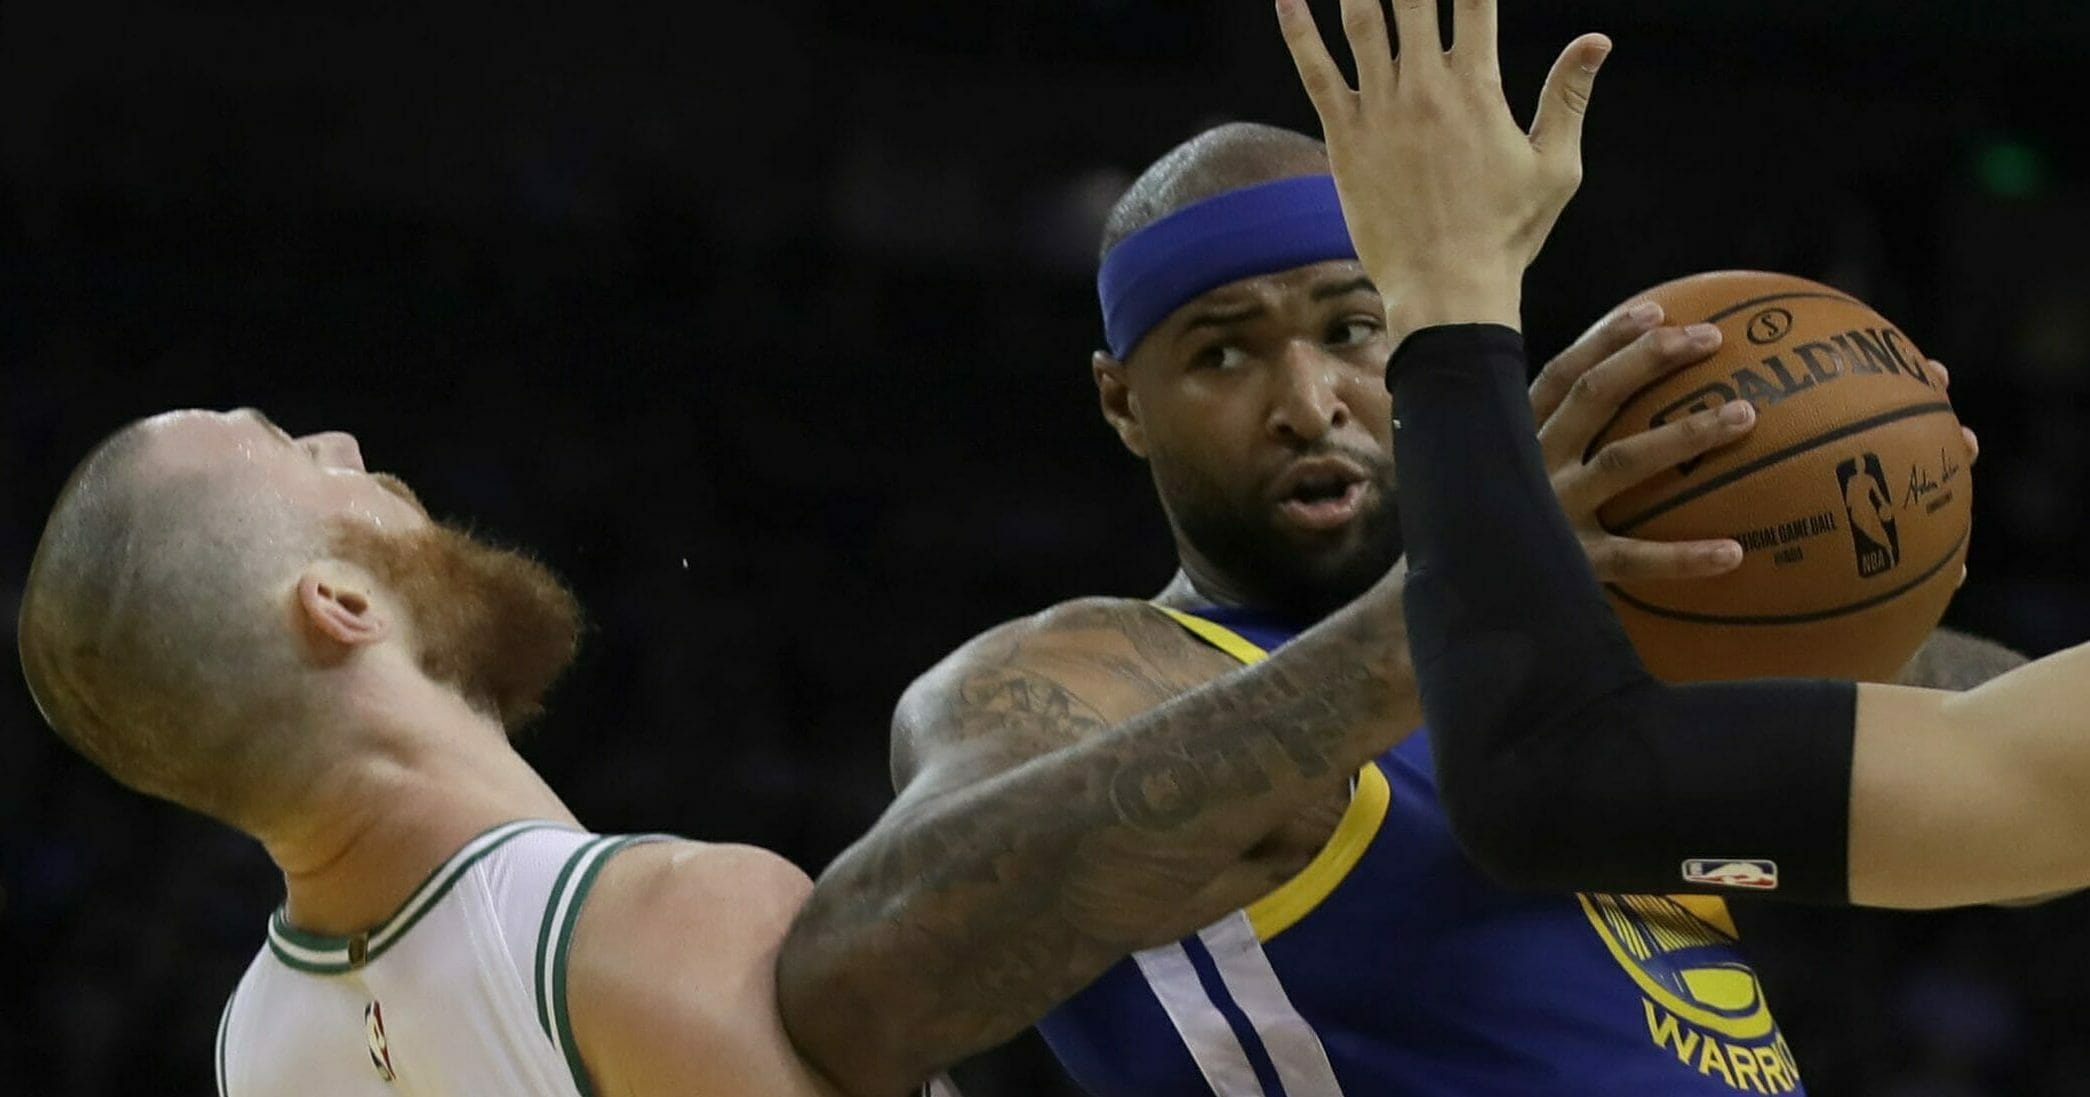 The Golden State Warriors' DeMarcus Cousins, center, fouls Boston Celtics' Aron Baynes, left, during the first half March 5, 2019, at Oracle Arena in Oakland, California.